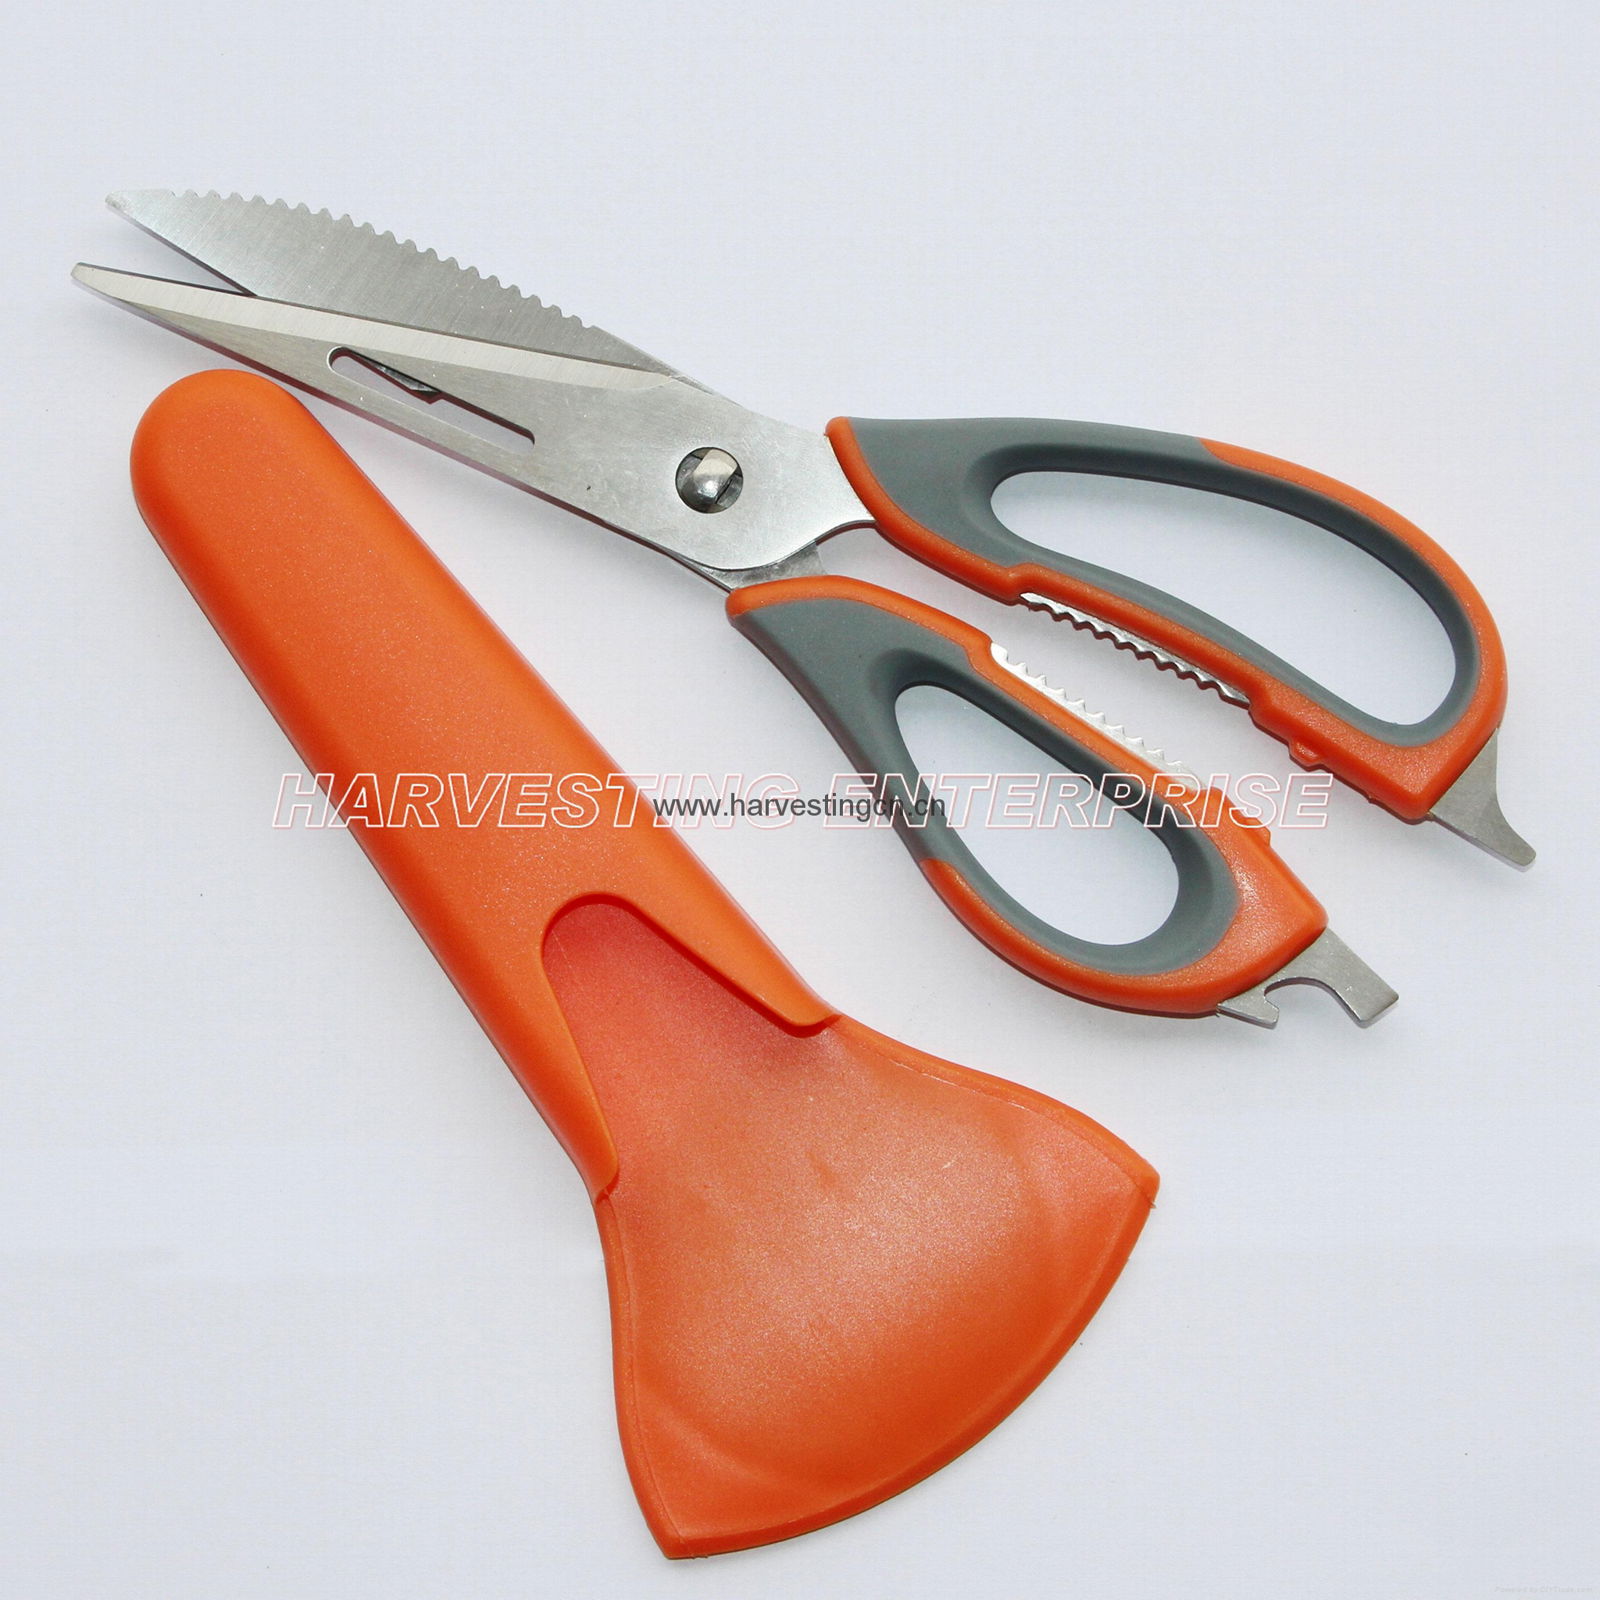 High quality stainless steel pizza scissors 